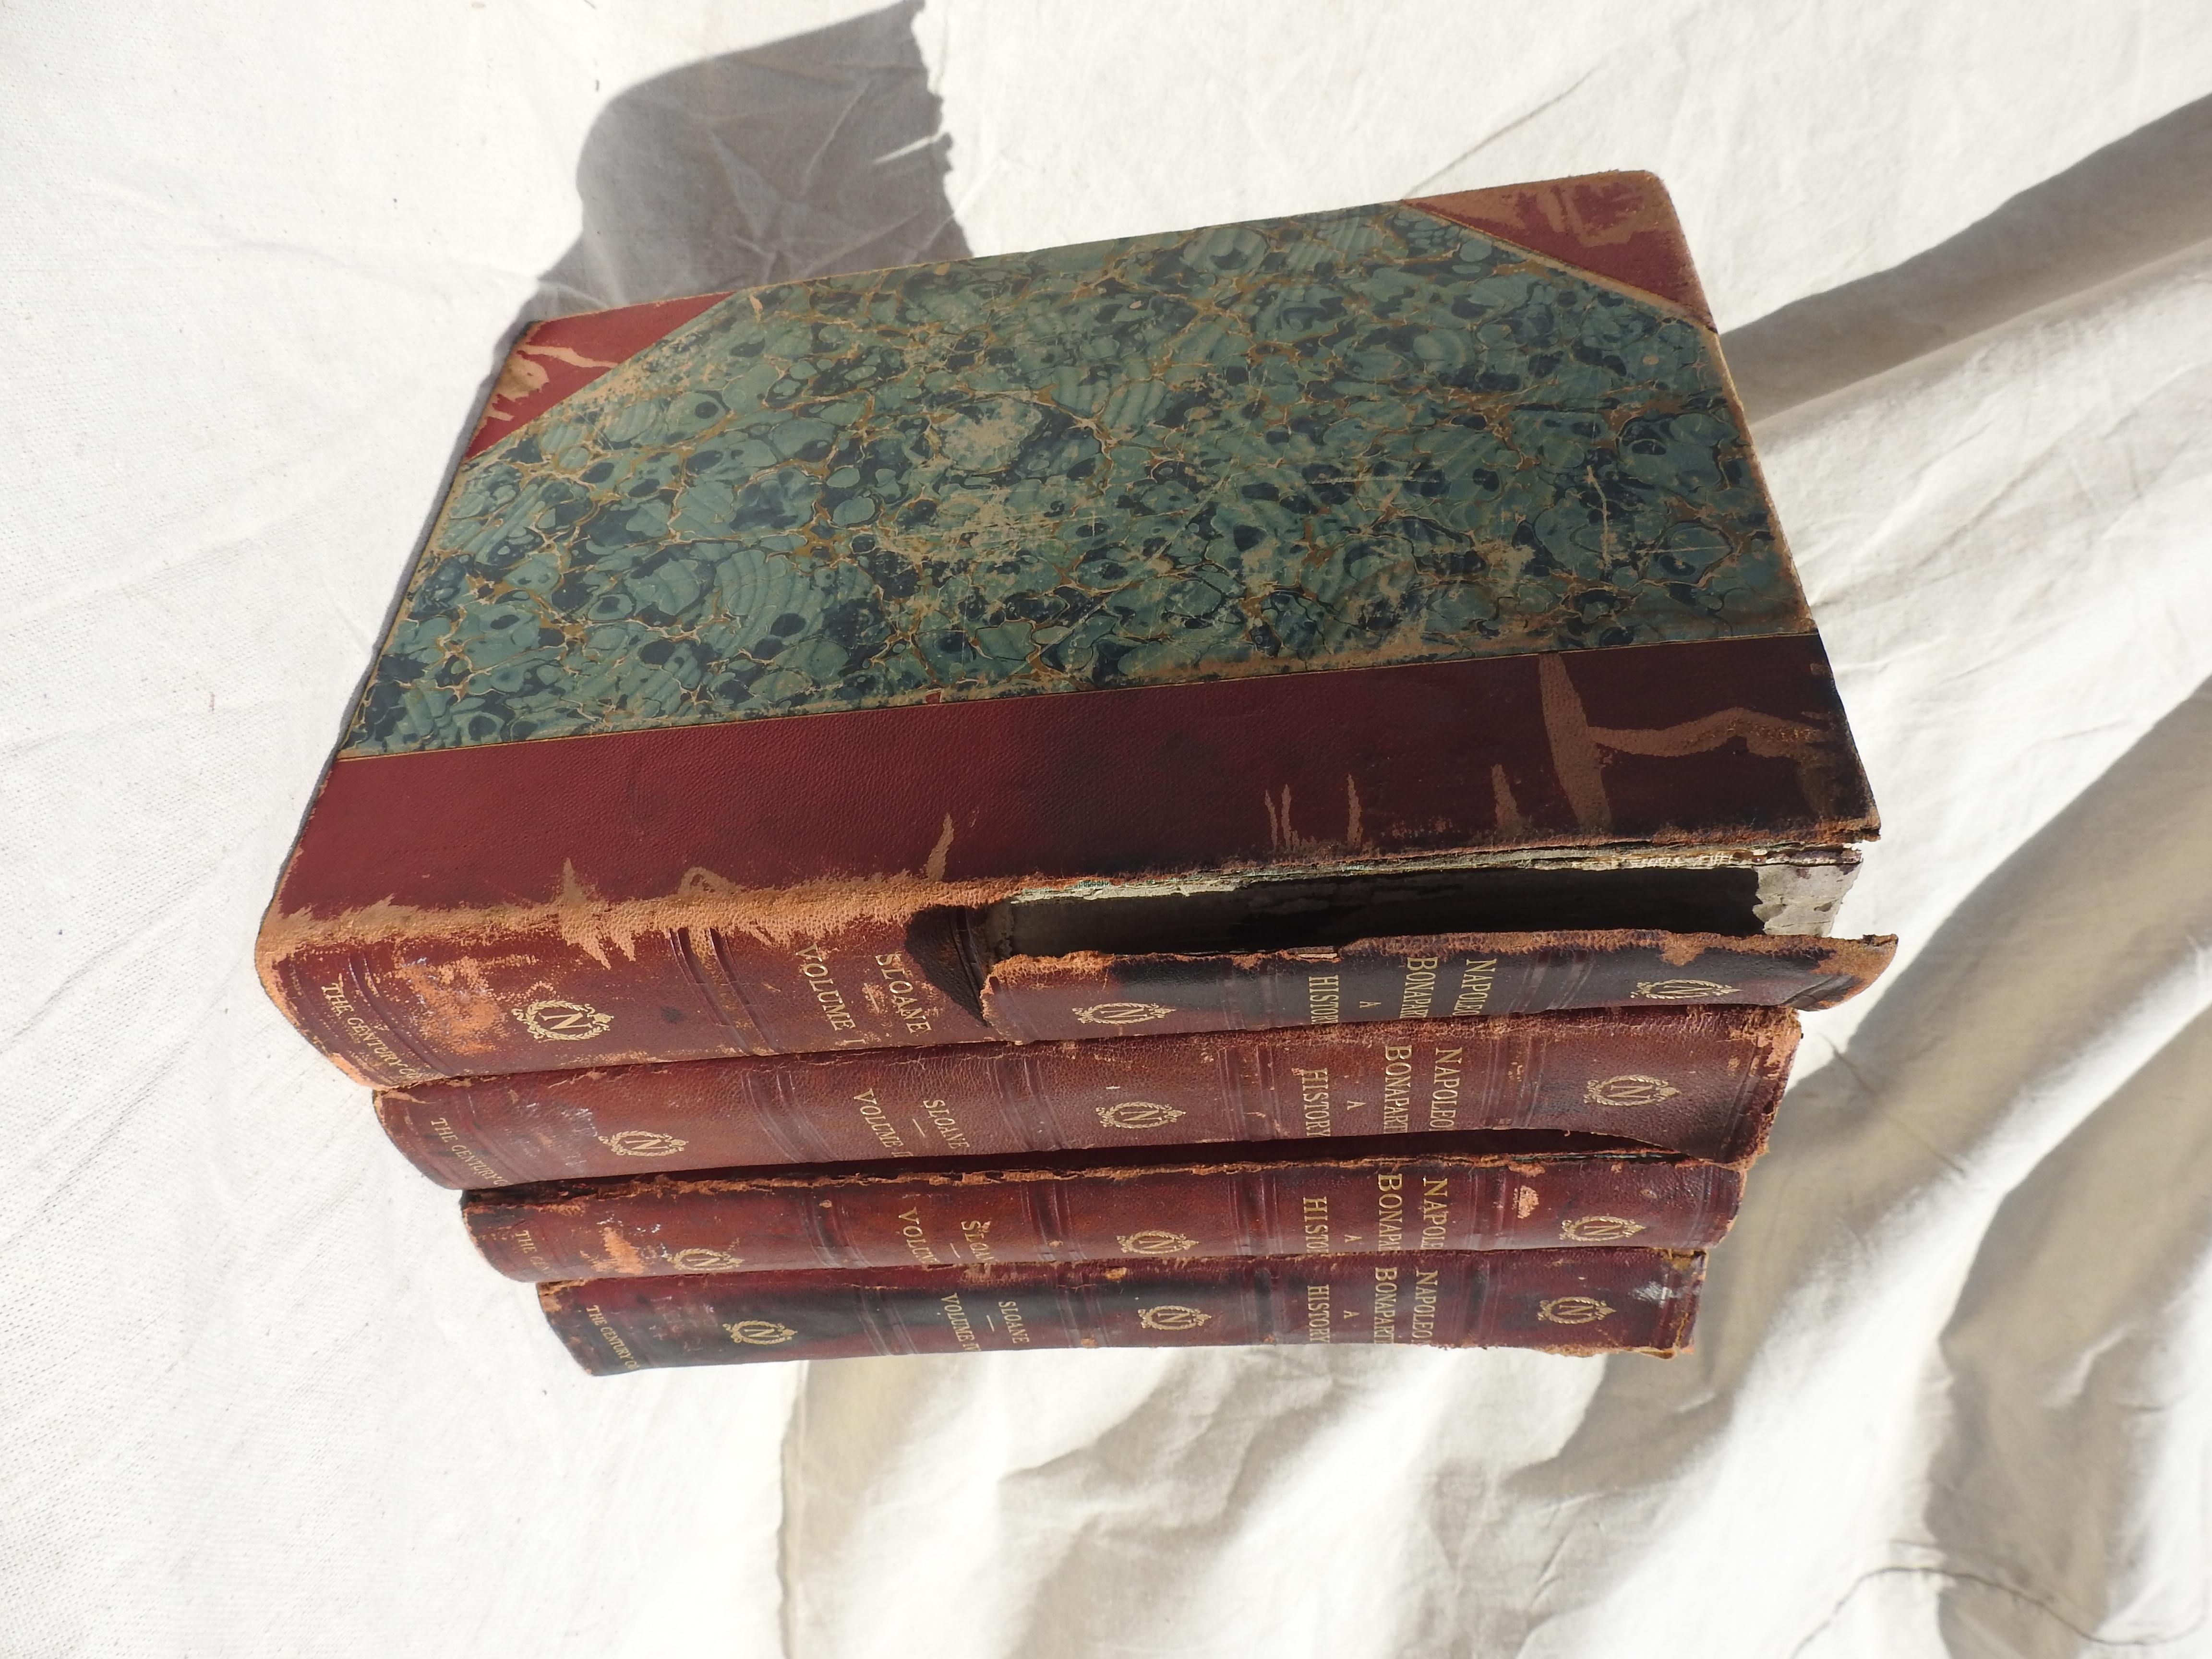 Volumes 1-4, Napoleon A History. Bound in leather and board. Spines are ripped a little but in tact.